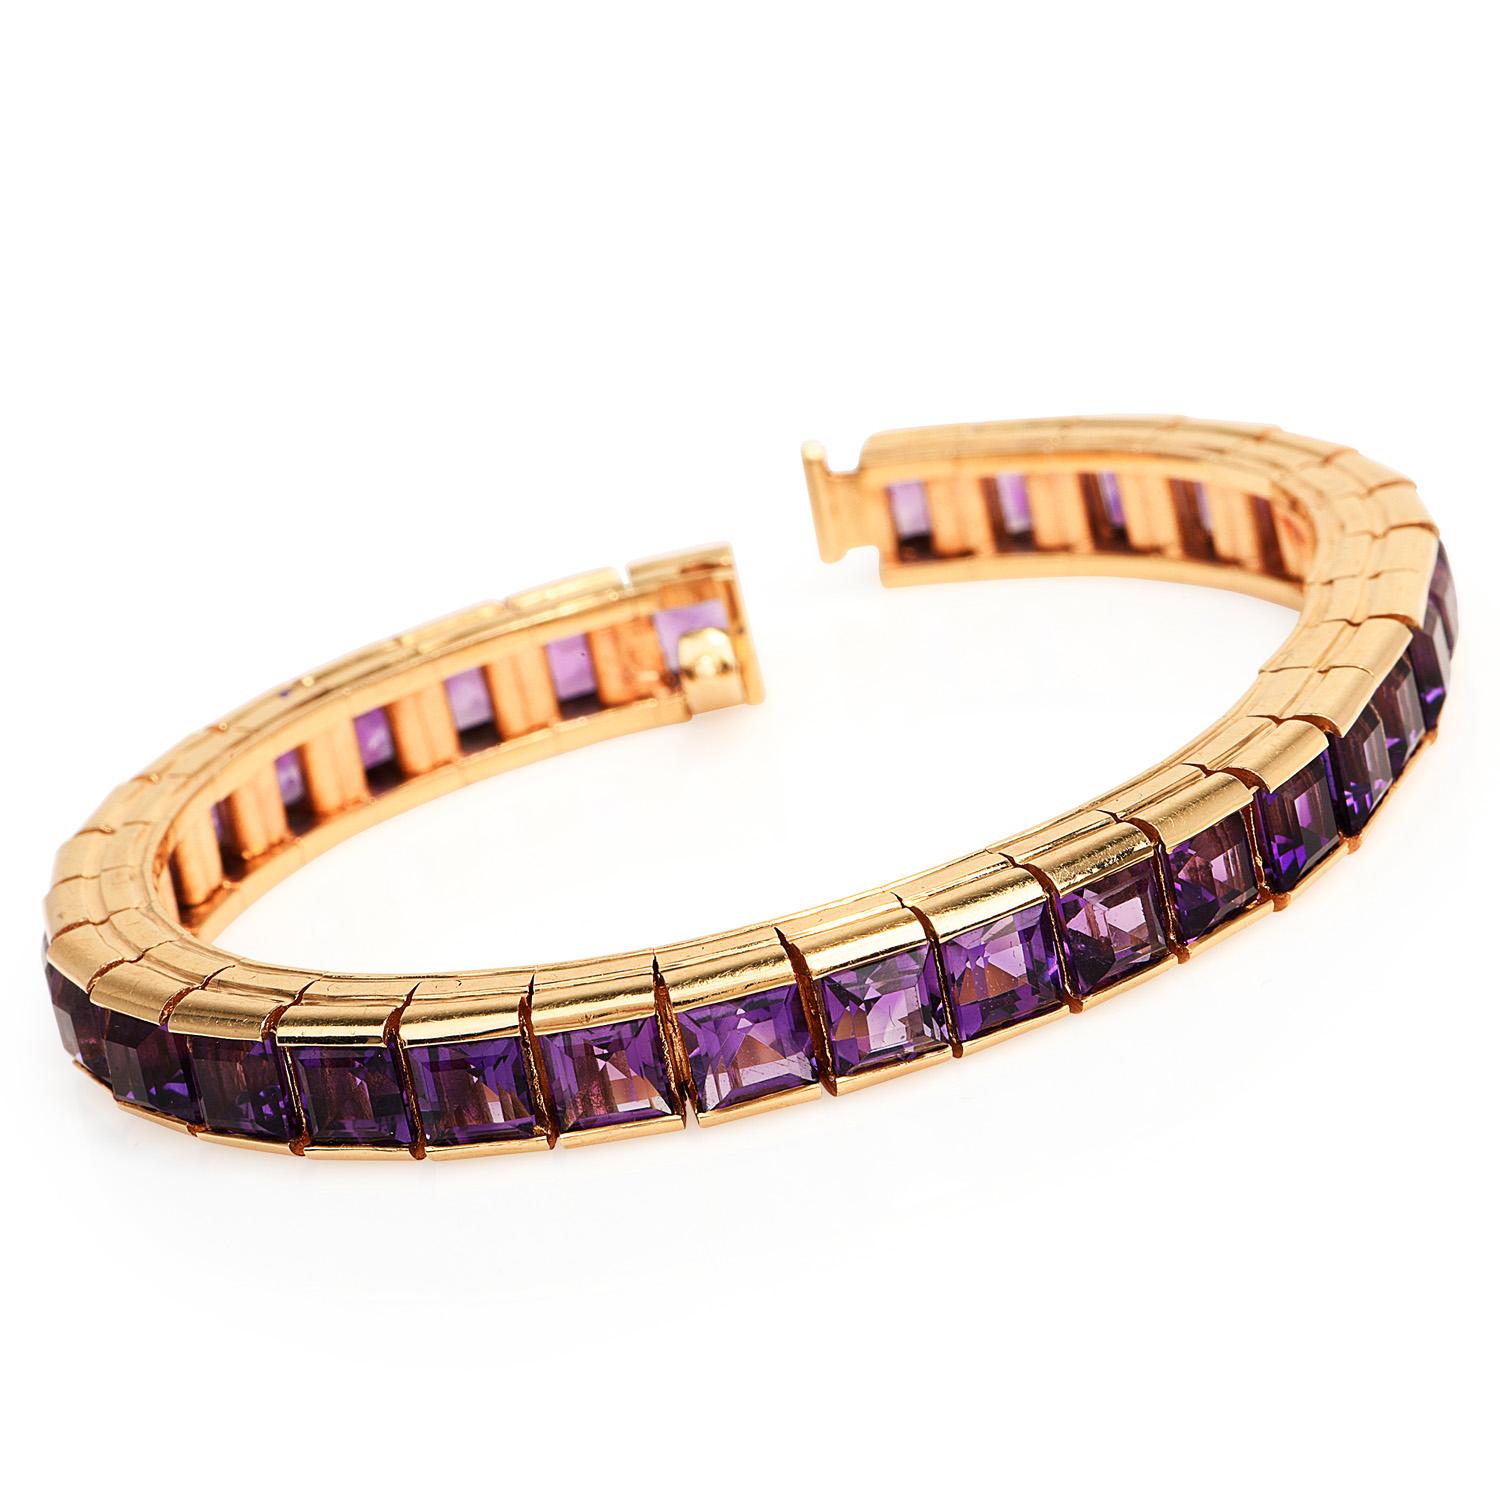 Retro Vintage line style square link bracelet, 

Crafted in solid 14K yellow gold, it composed by (32) square cut, channel-set, genuine Amethyst weighing approximately 22.00 carats.
The complete piece weights 40.0 grams, the length measures